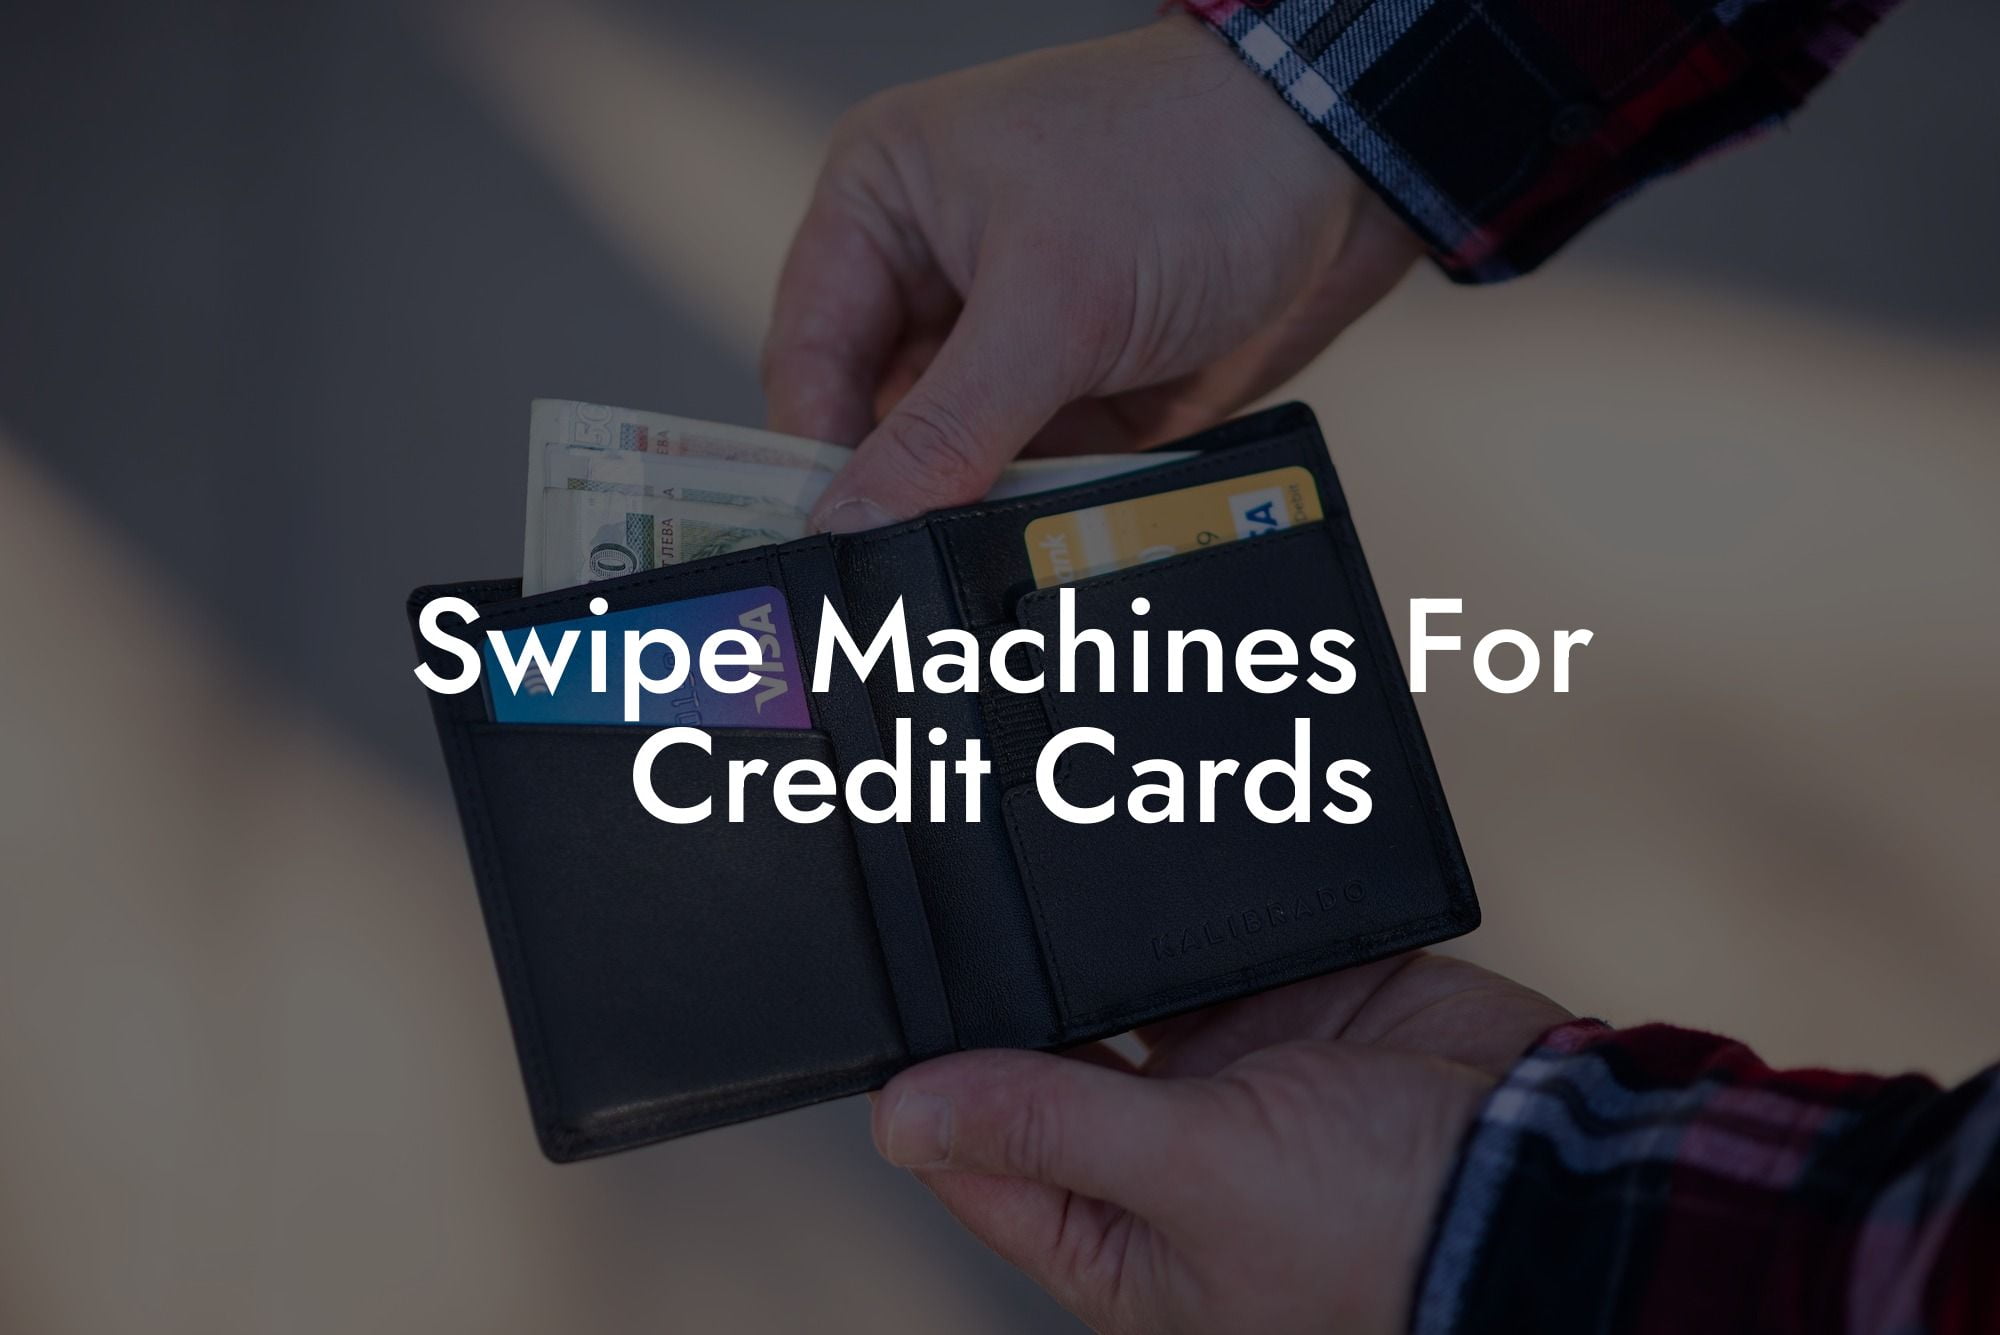 Swipe Machines For Credit Cards